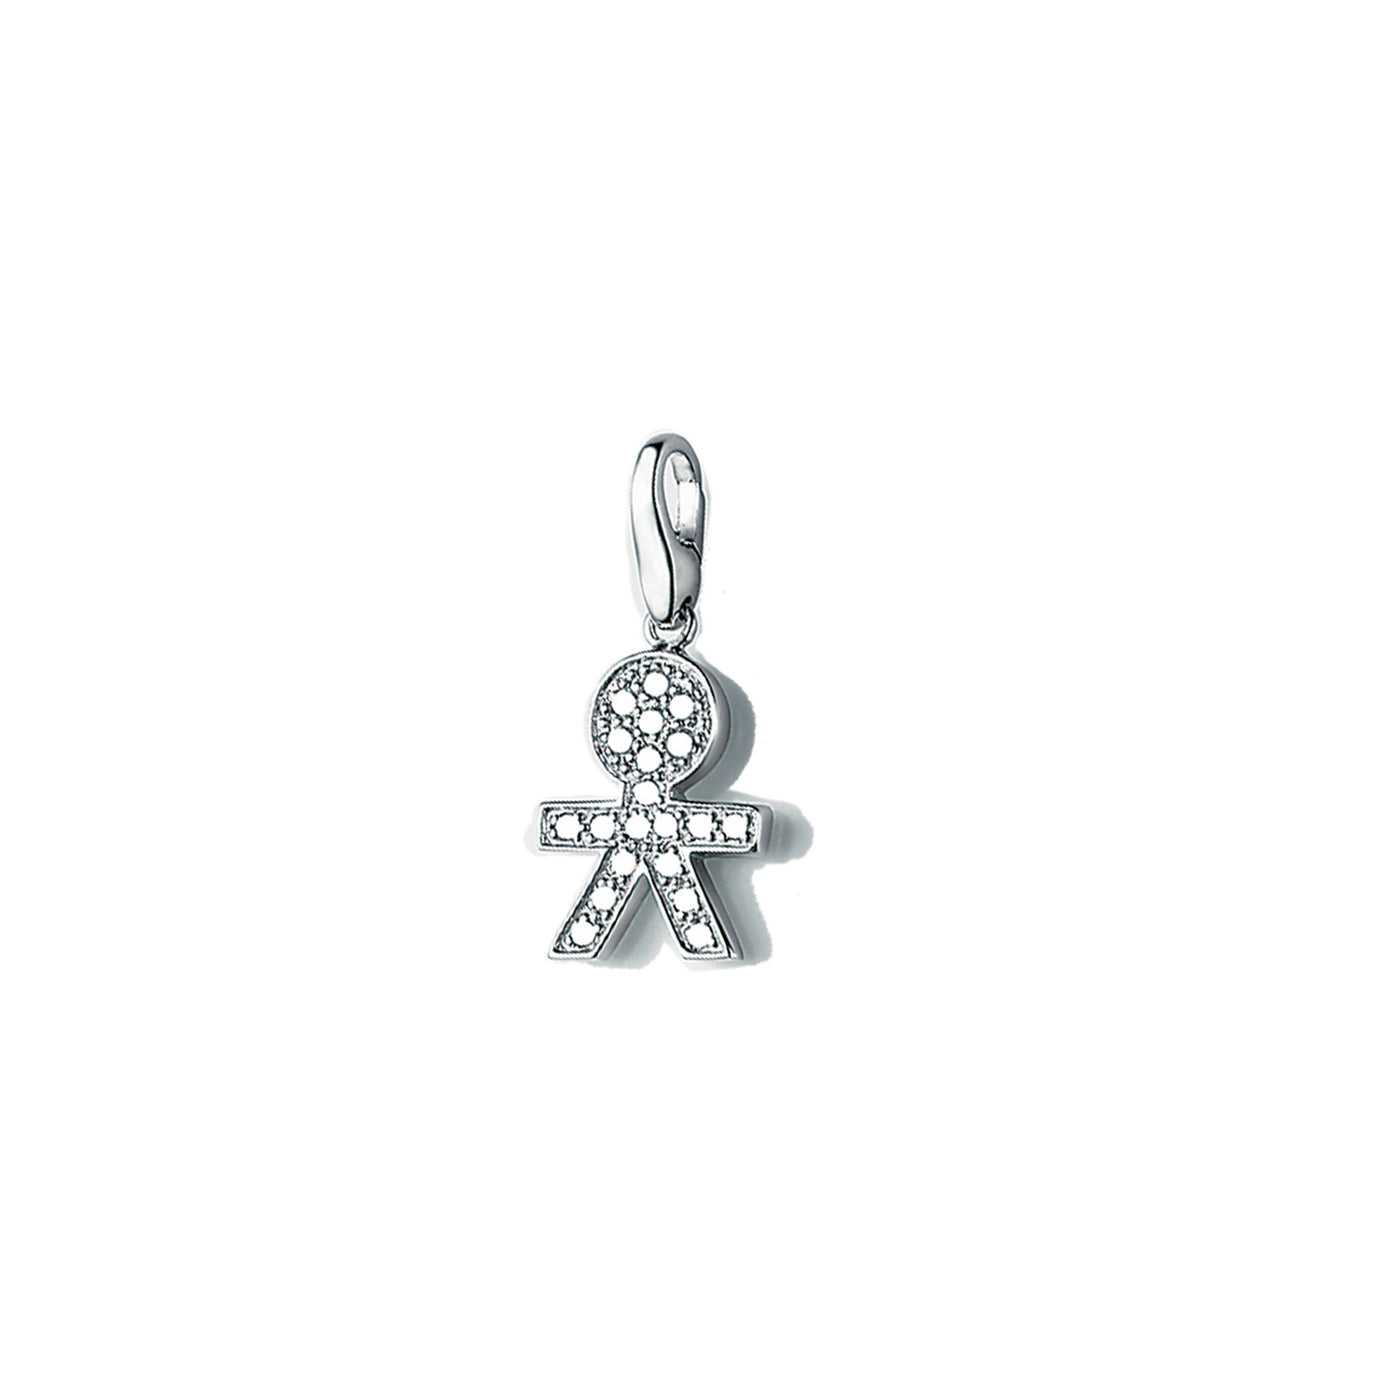 Rebecca Sloane Sterling Silver Boy Studded With Cz Charm